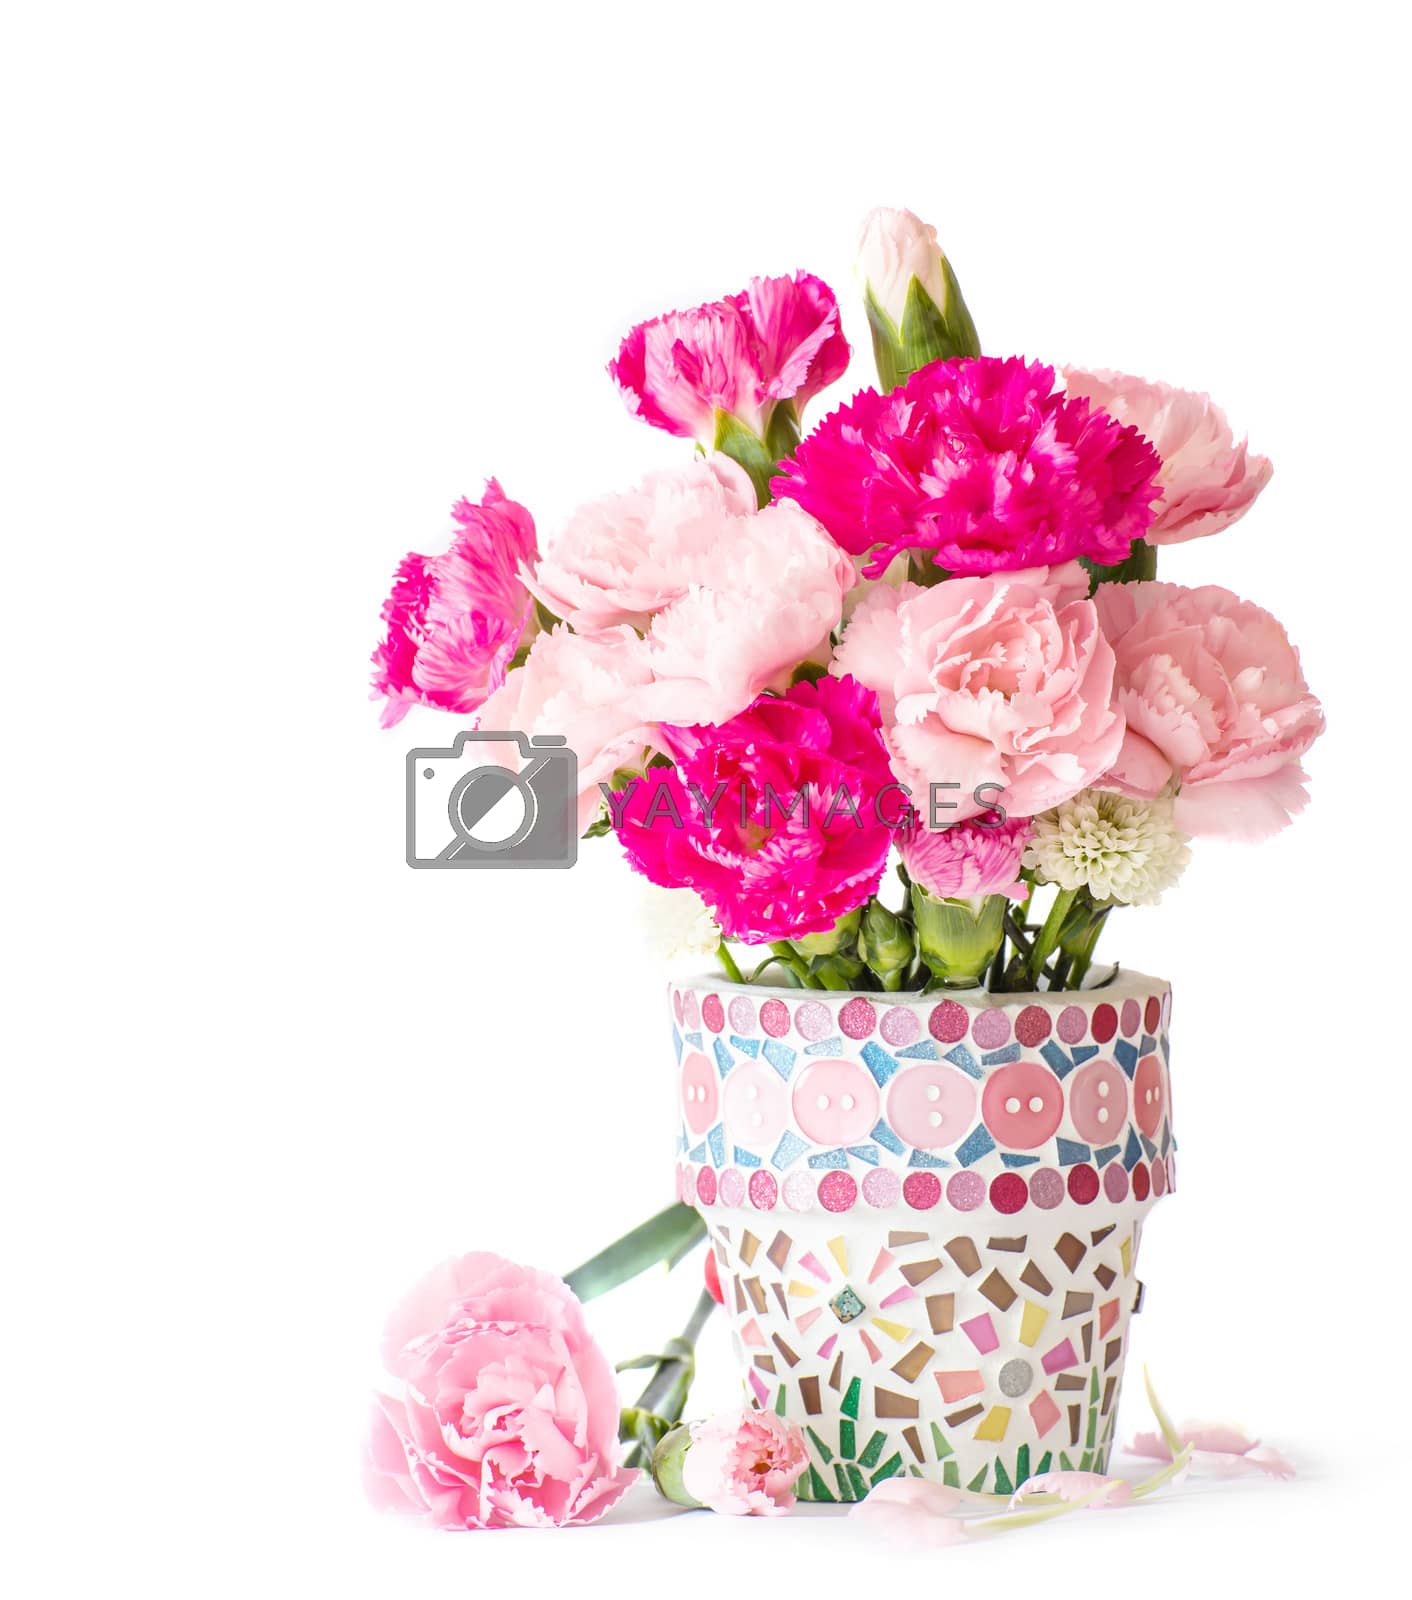 Royalty free image of Carnation in mosaic flower pot by Myimagine